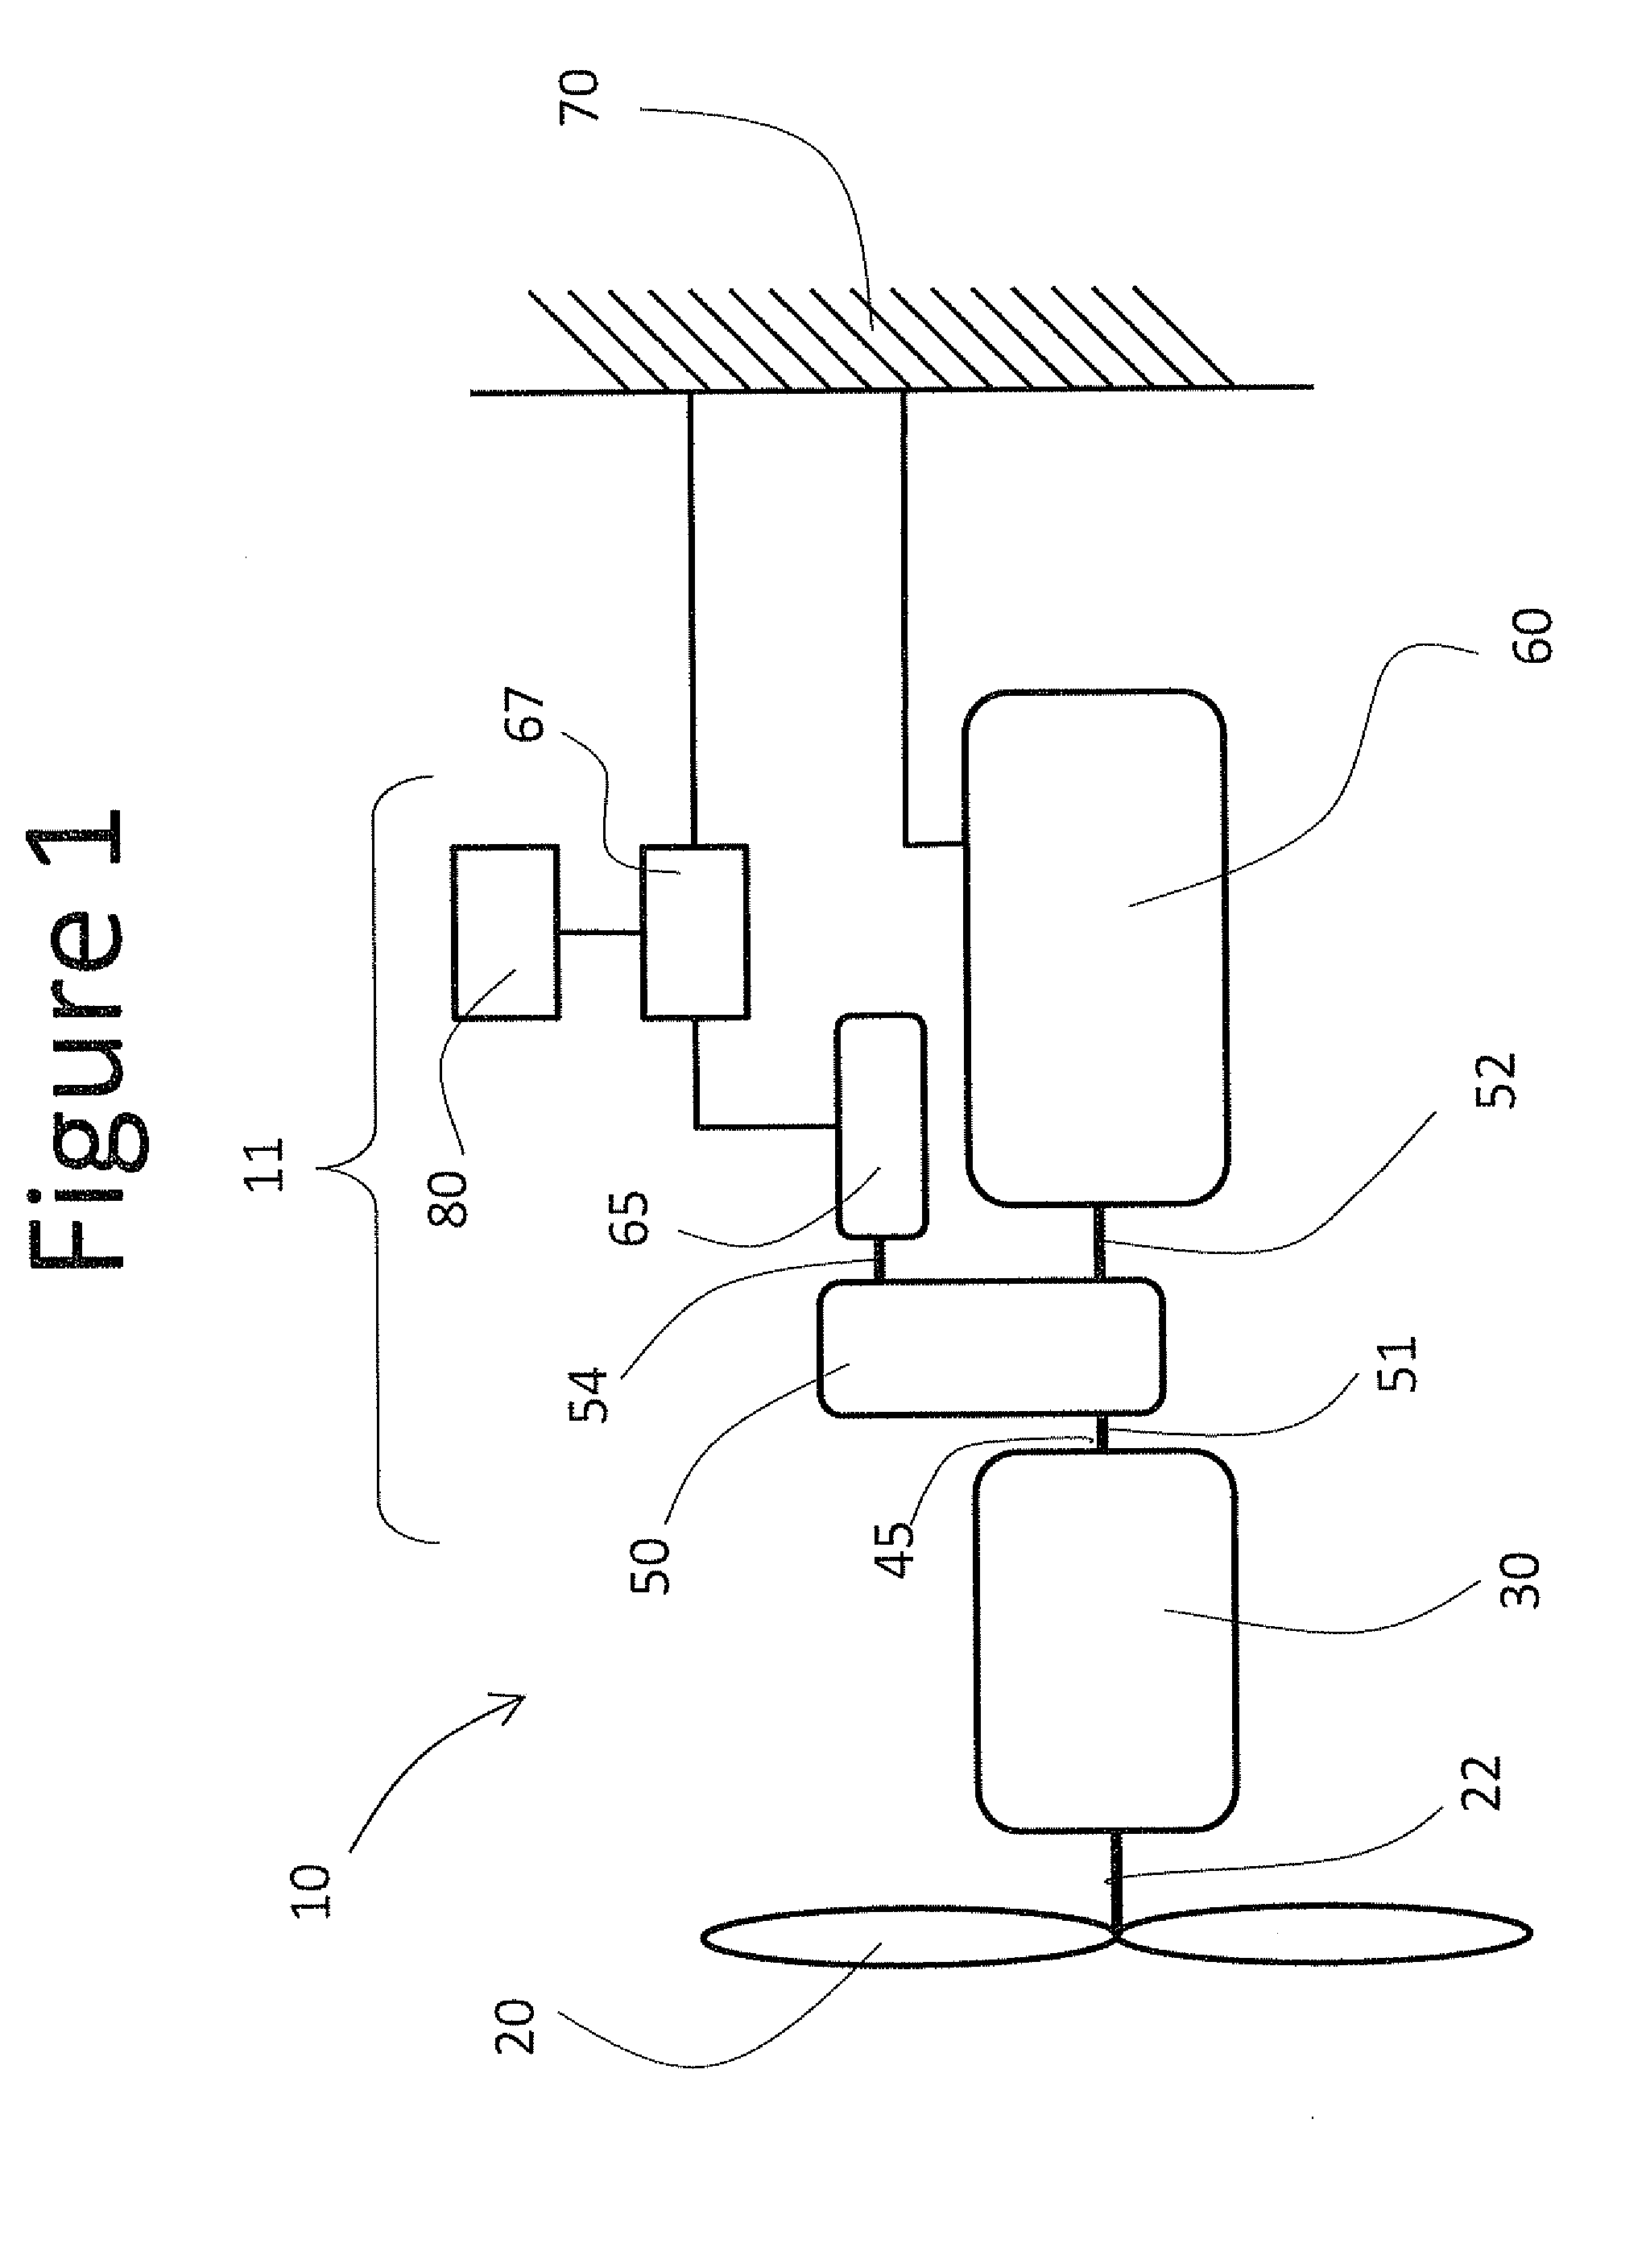 Wind Turbine With Variable Speed Auxiliary Generator and Load Sharing Algorithm